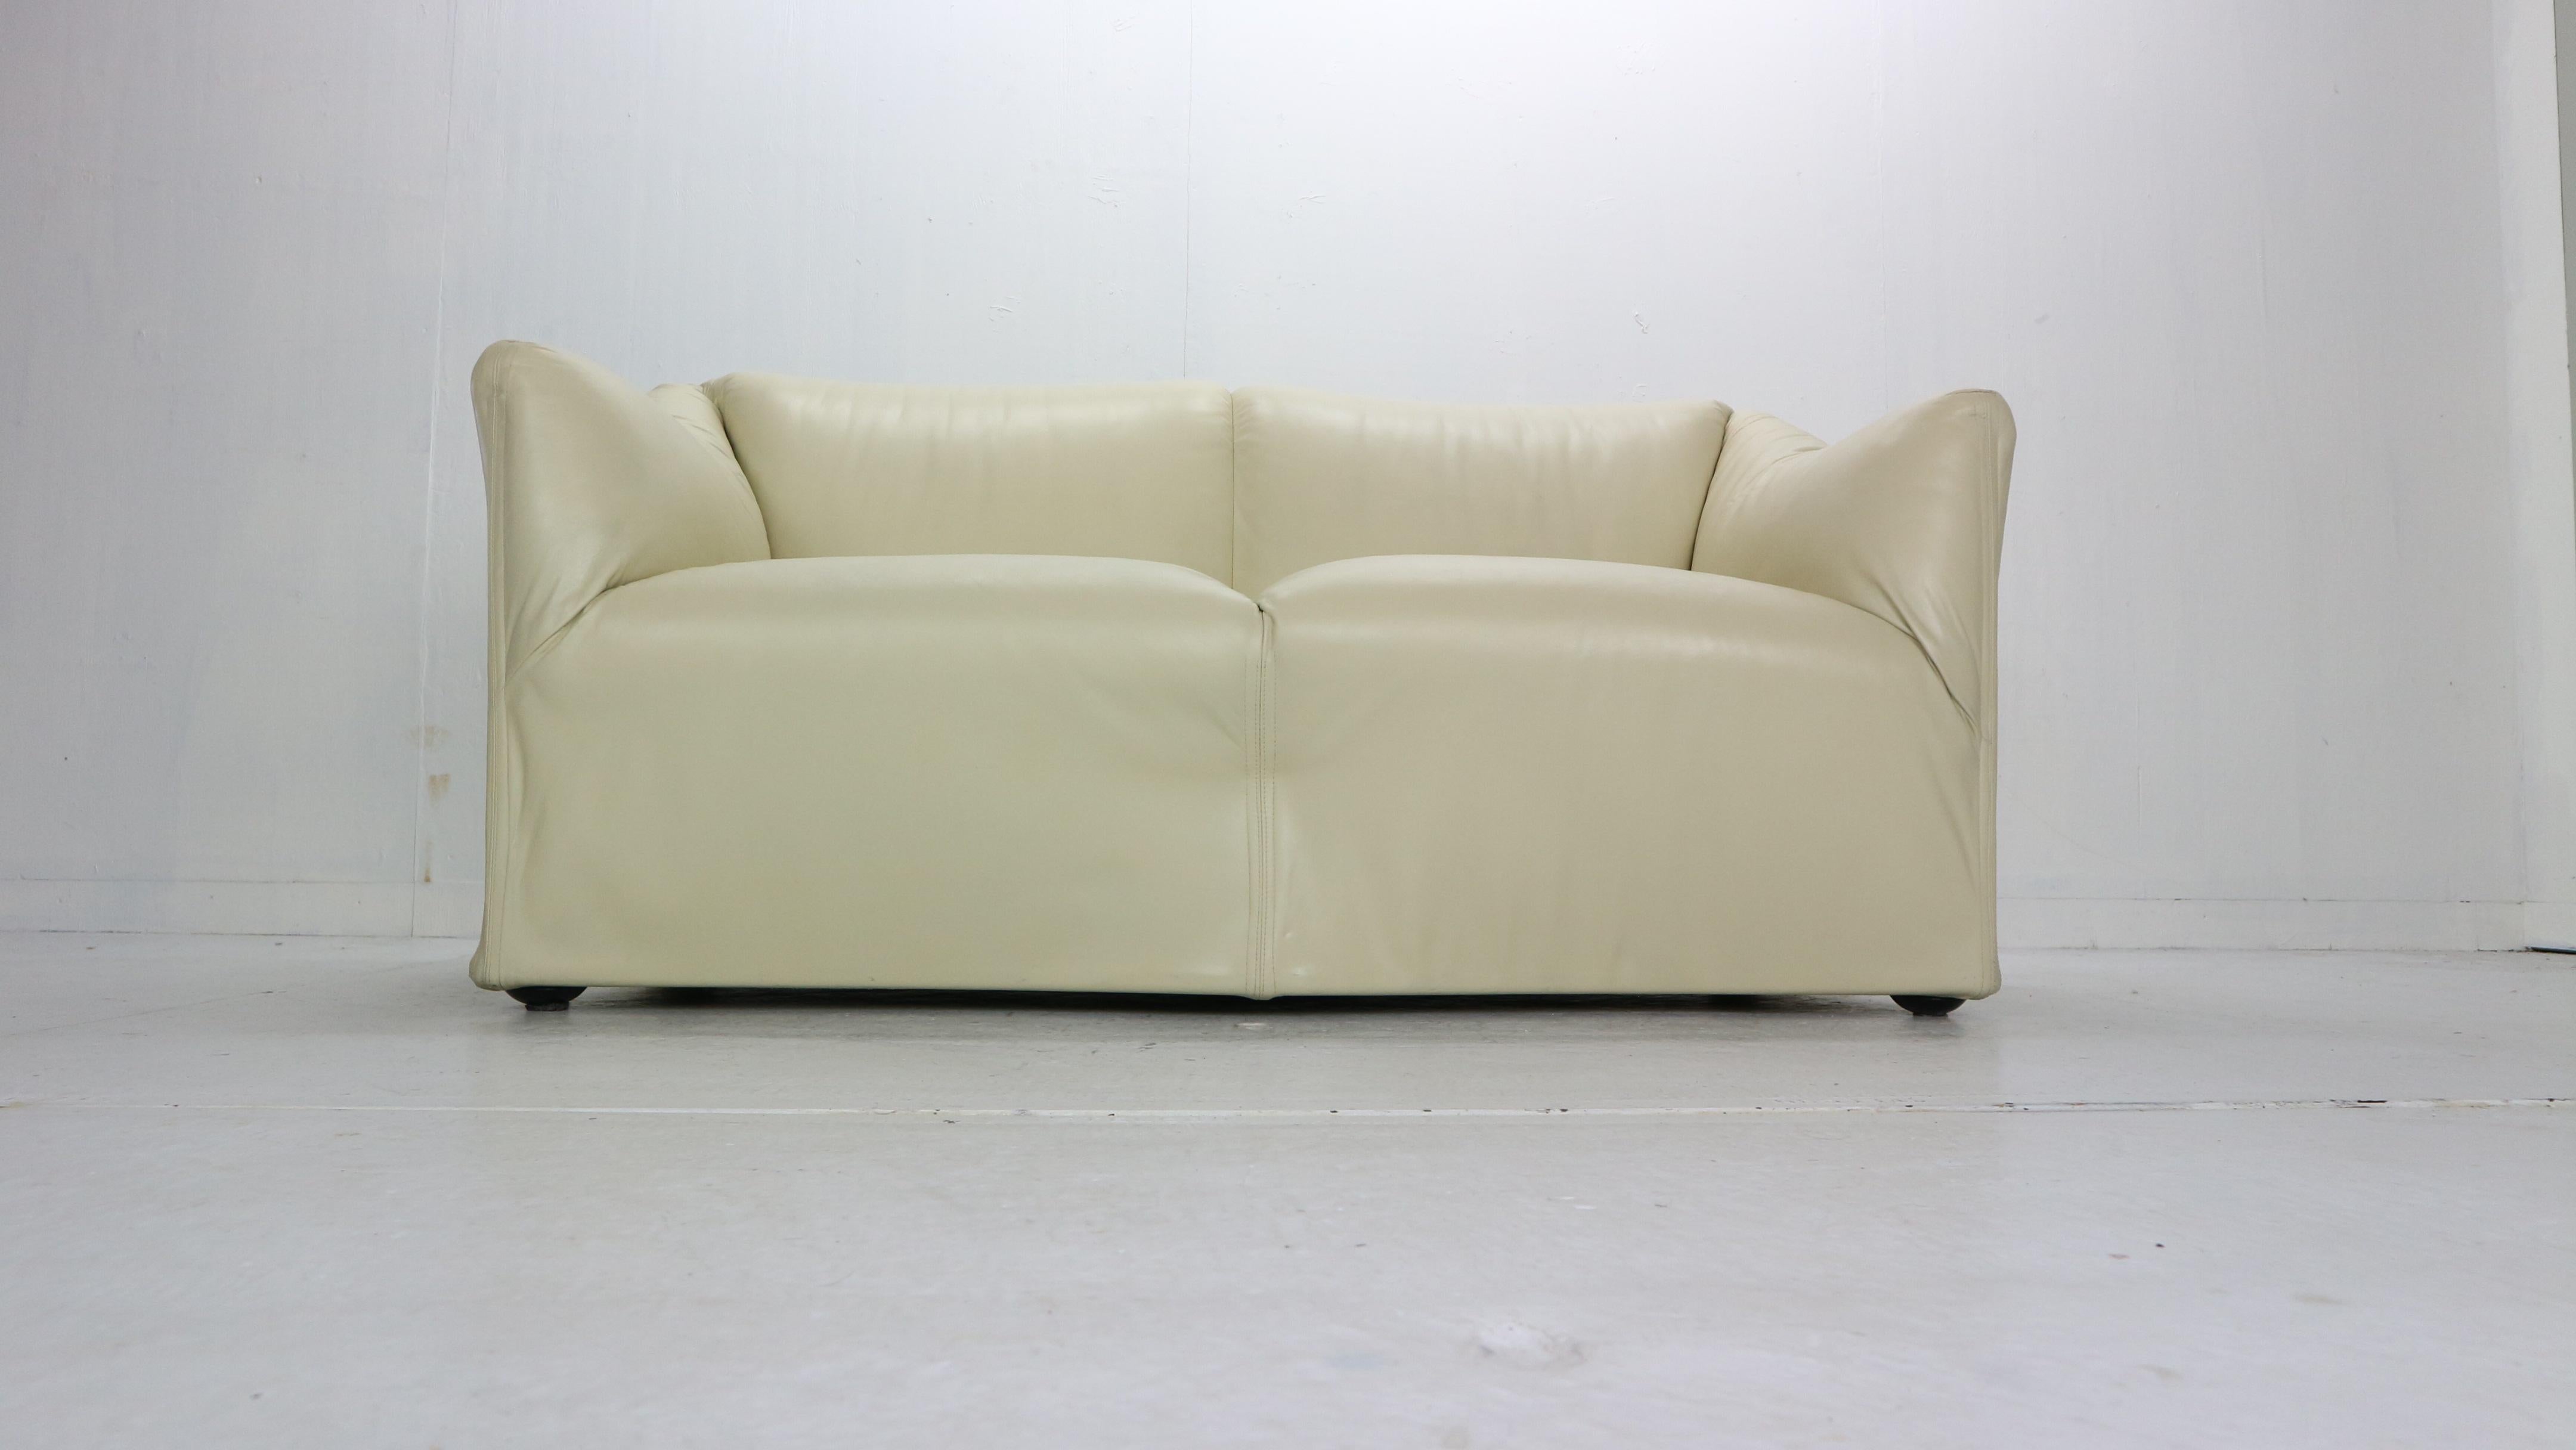 This lounge two-seat sofa or loveseat designed by Mario Bellini for Cassina manufacture in 1970s period, Italy.
Model No: 685,
Creme color leather original upholstery, steel frame construction on casters.

Tentazione means temptation an inviting